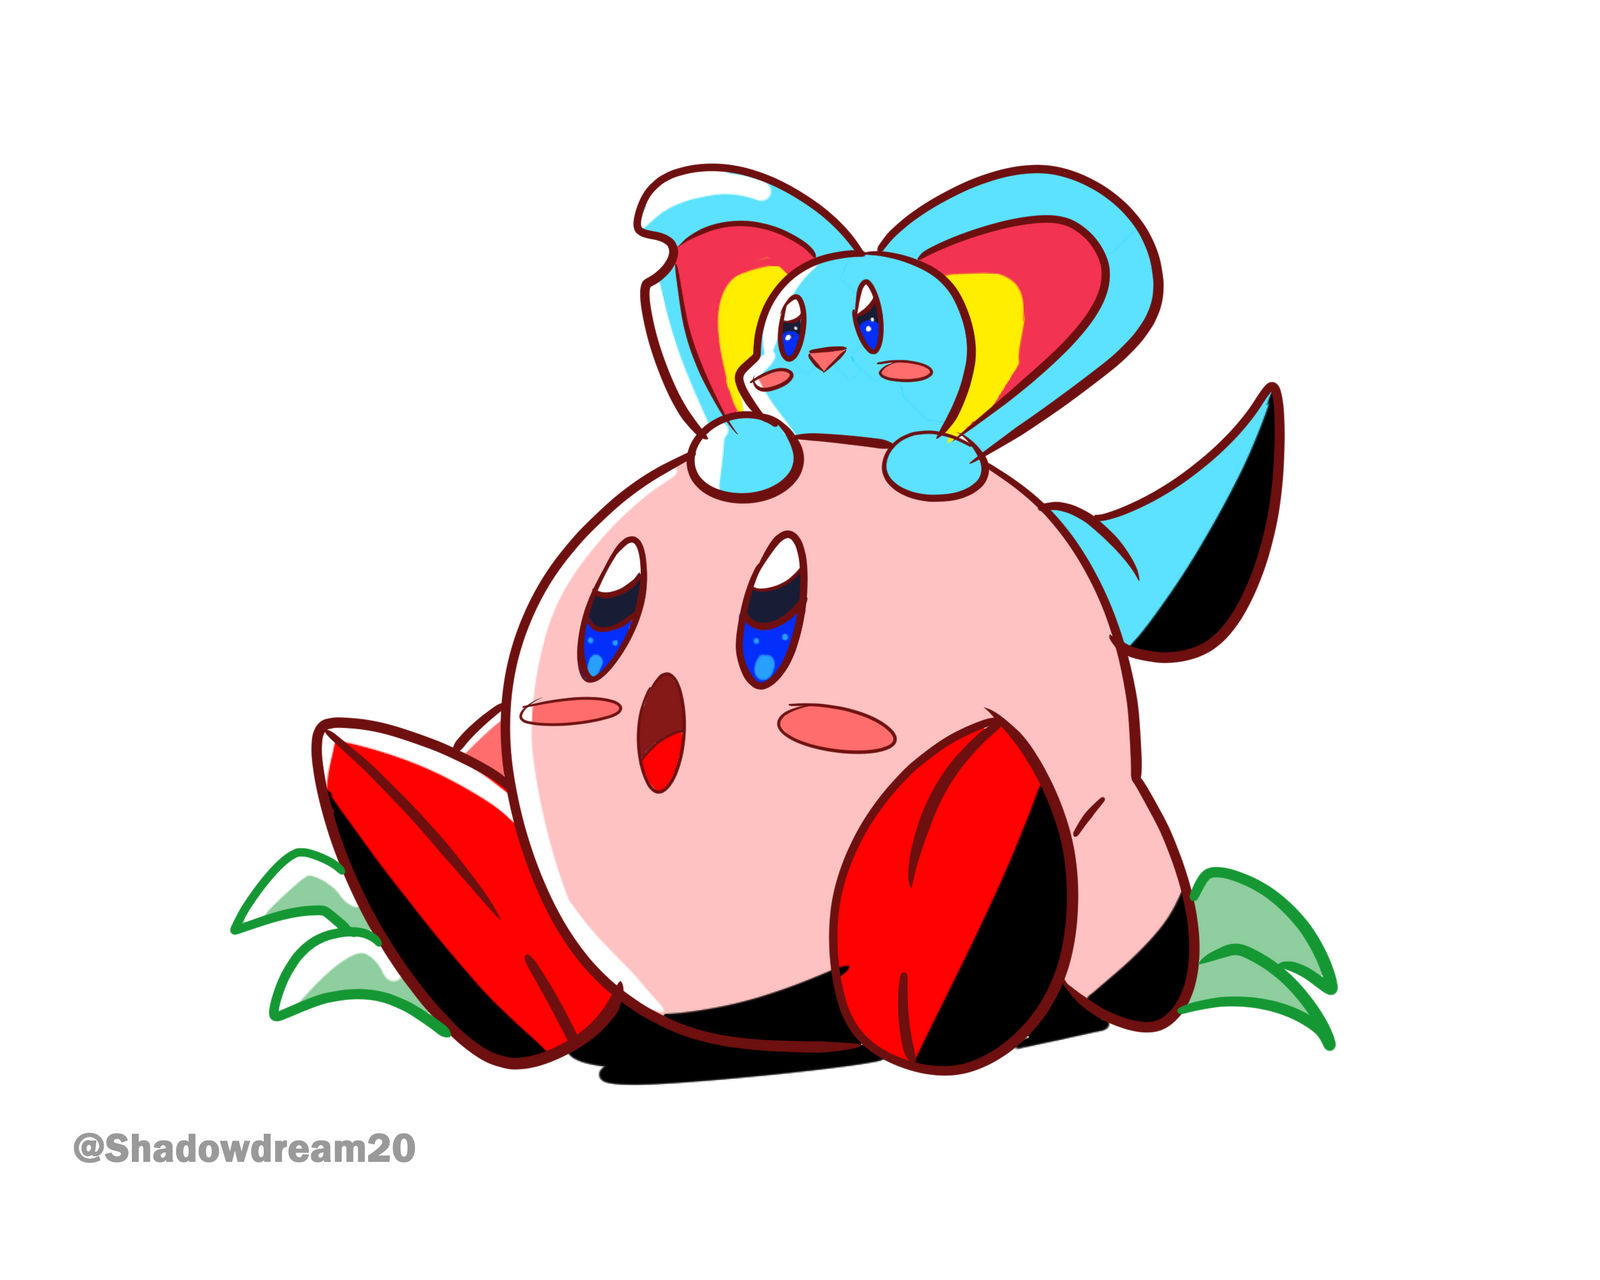 Thunder in: Kirby and the Forgotten Land by Firespirit27 on DeviantArt